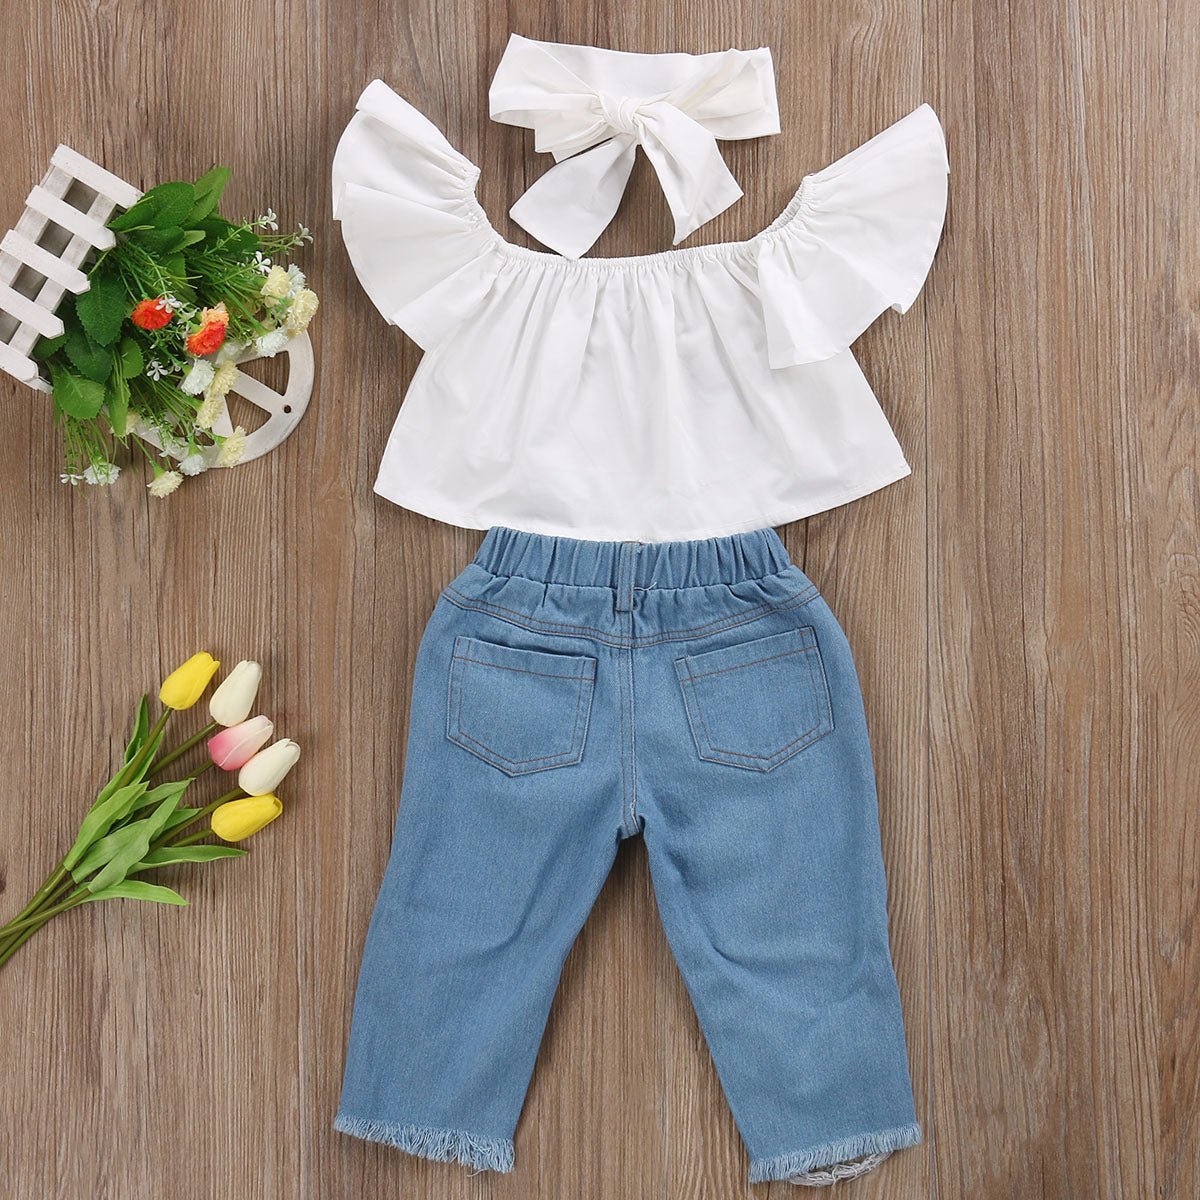 Baby Kids Girls Off Shoulder Tops Ripped Leggings Pants 3PCS Outfits Set